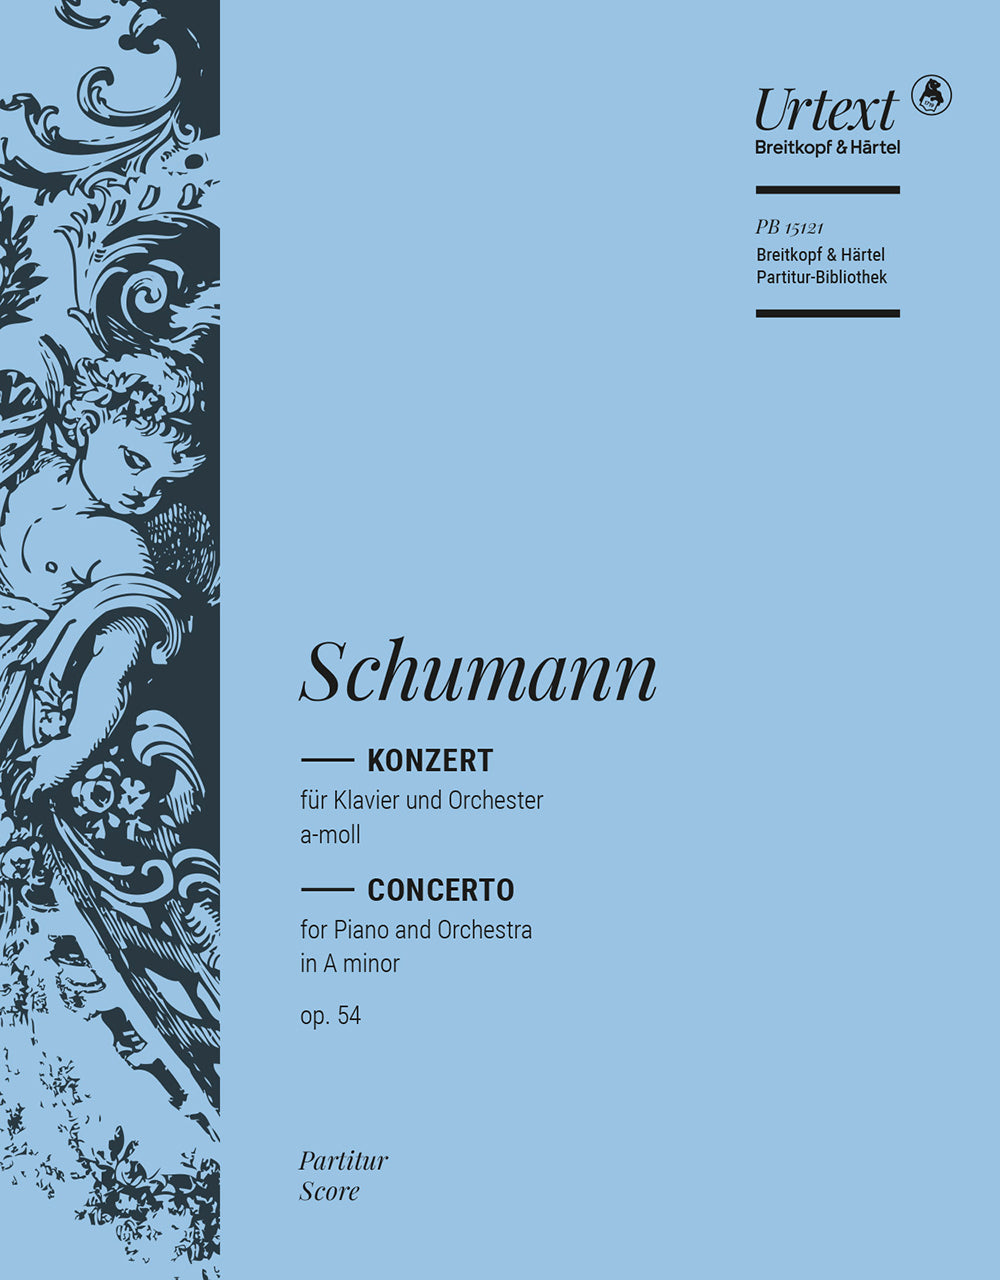 Schumann Piano Concerto in A minor Op. 54